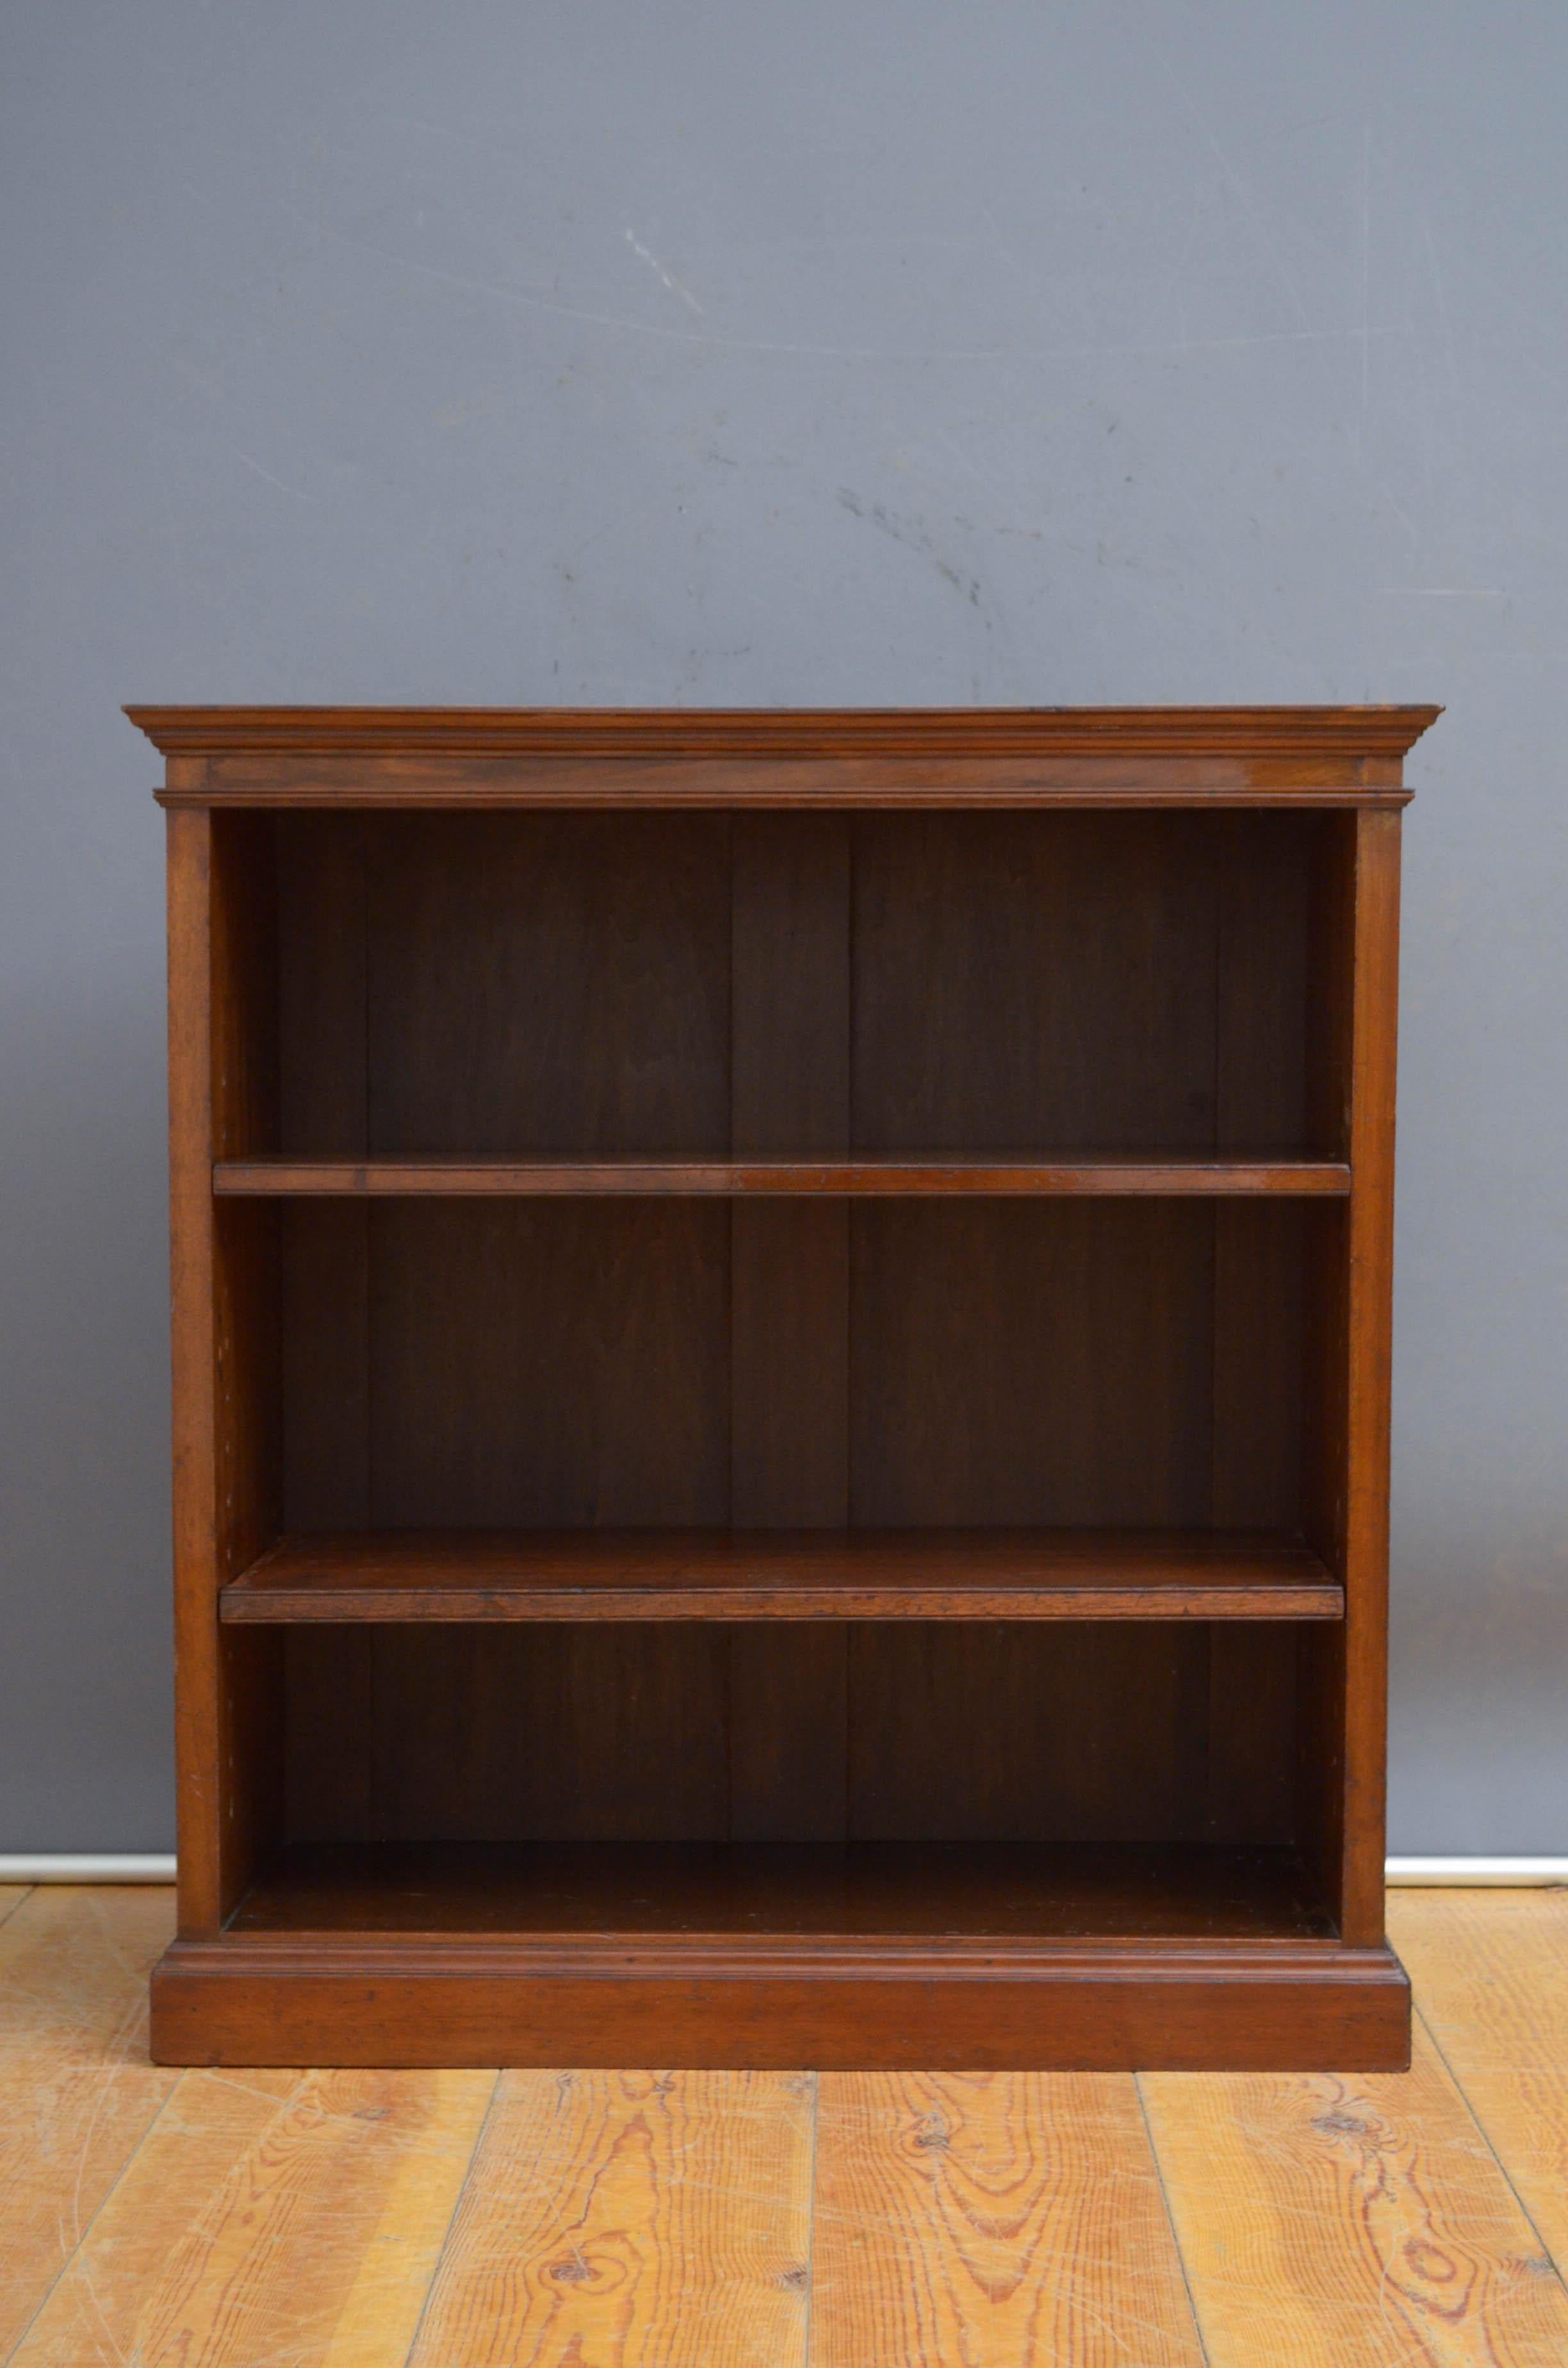 Sn5512 Edwardian mahogany and inlaid open bookcase of unusually narrow proportions, having figured mahogany top crossbanded in satinwood above shallow frieze and two height adjustable shelves, all standing on plinth base. This antique bookcase is in